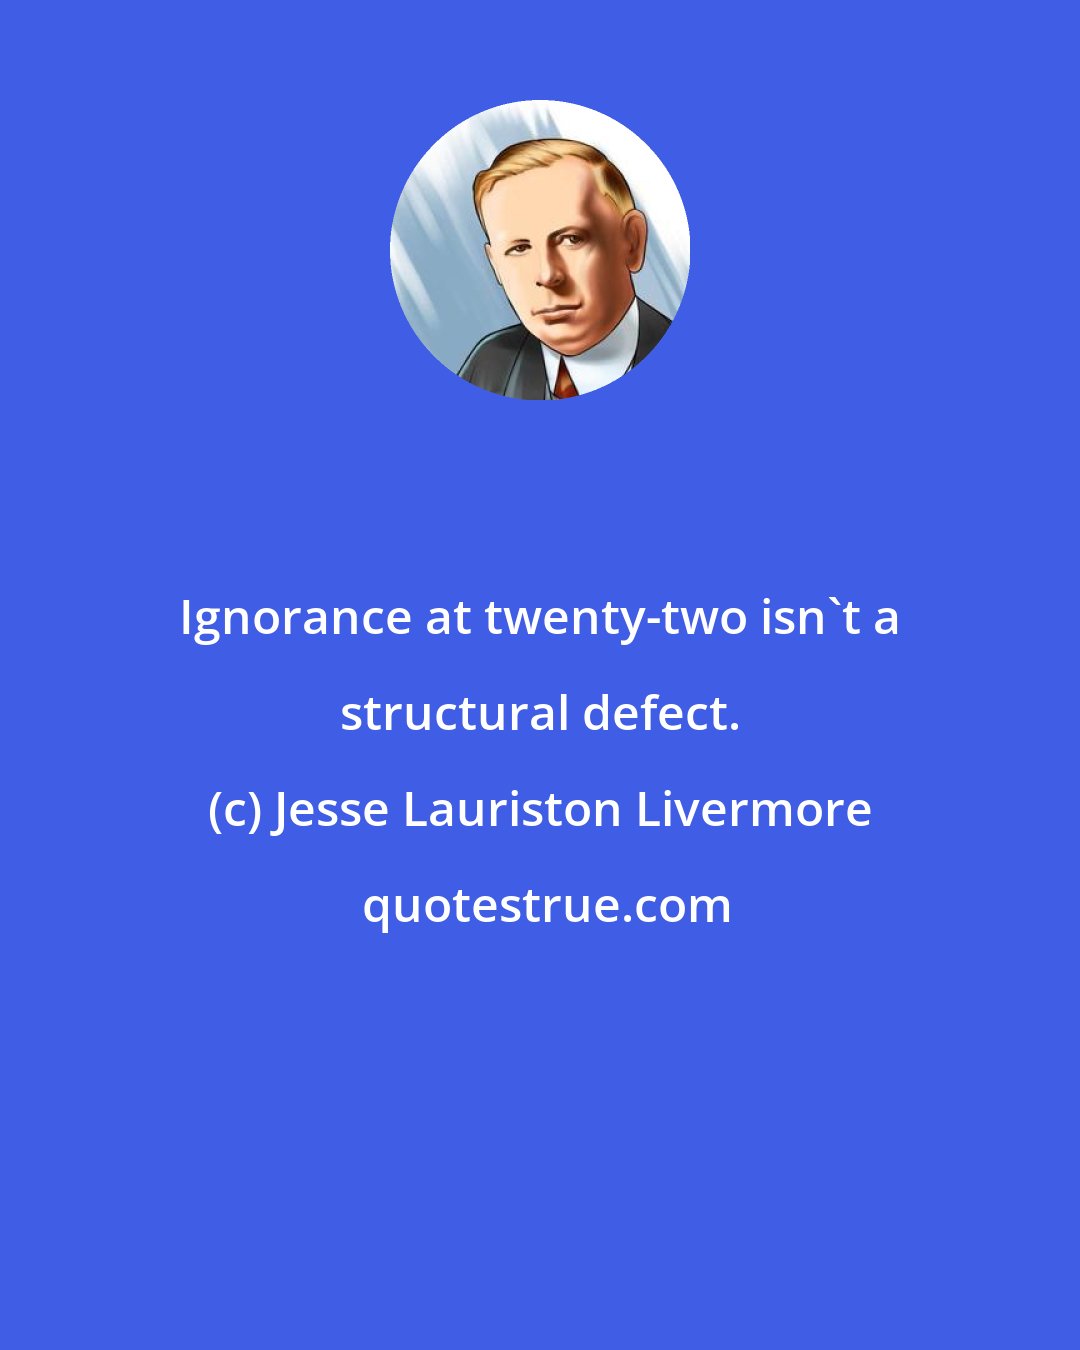 Jesse Lauriston Livermore: Ignorance at twenty-two isn't a structural defect.